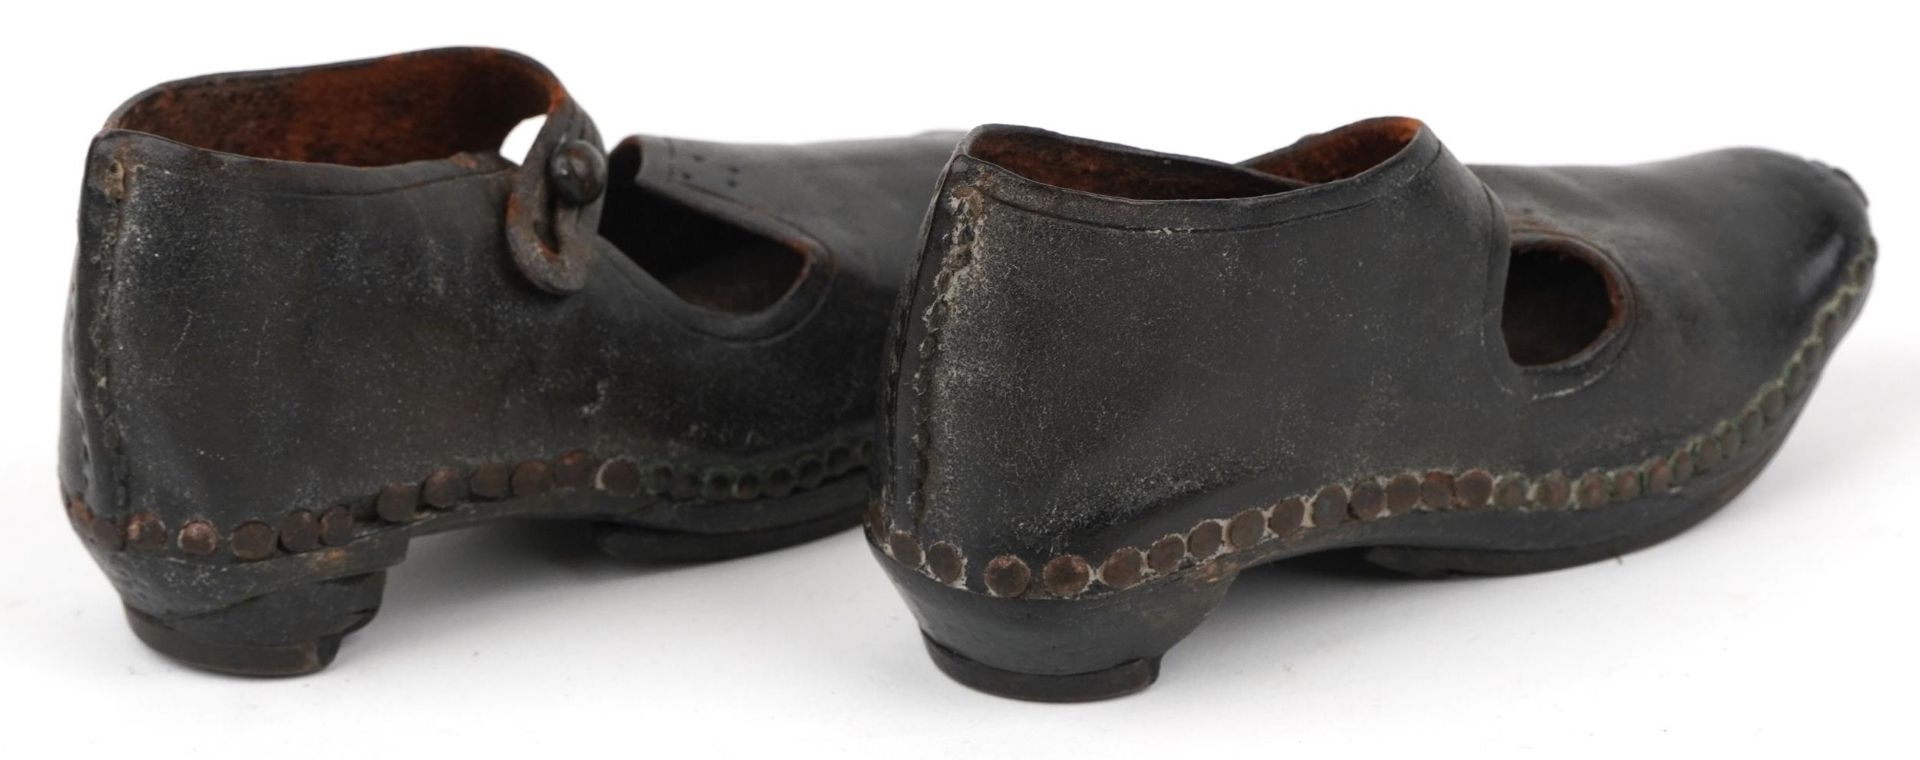 Pair of Victorian leather child's shoes and two aprons - Image 3 of 4